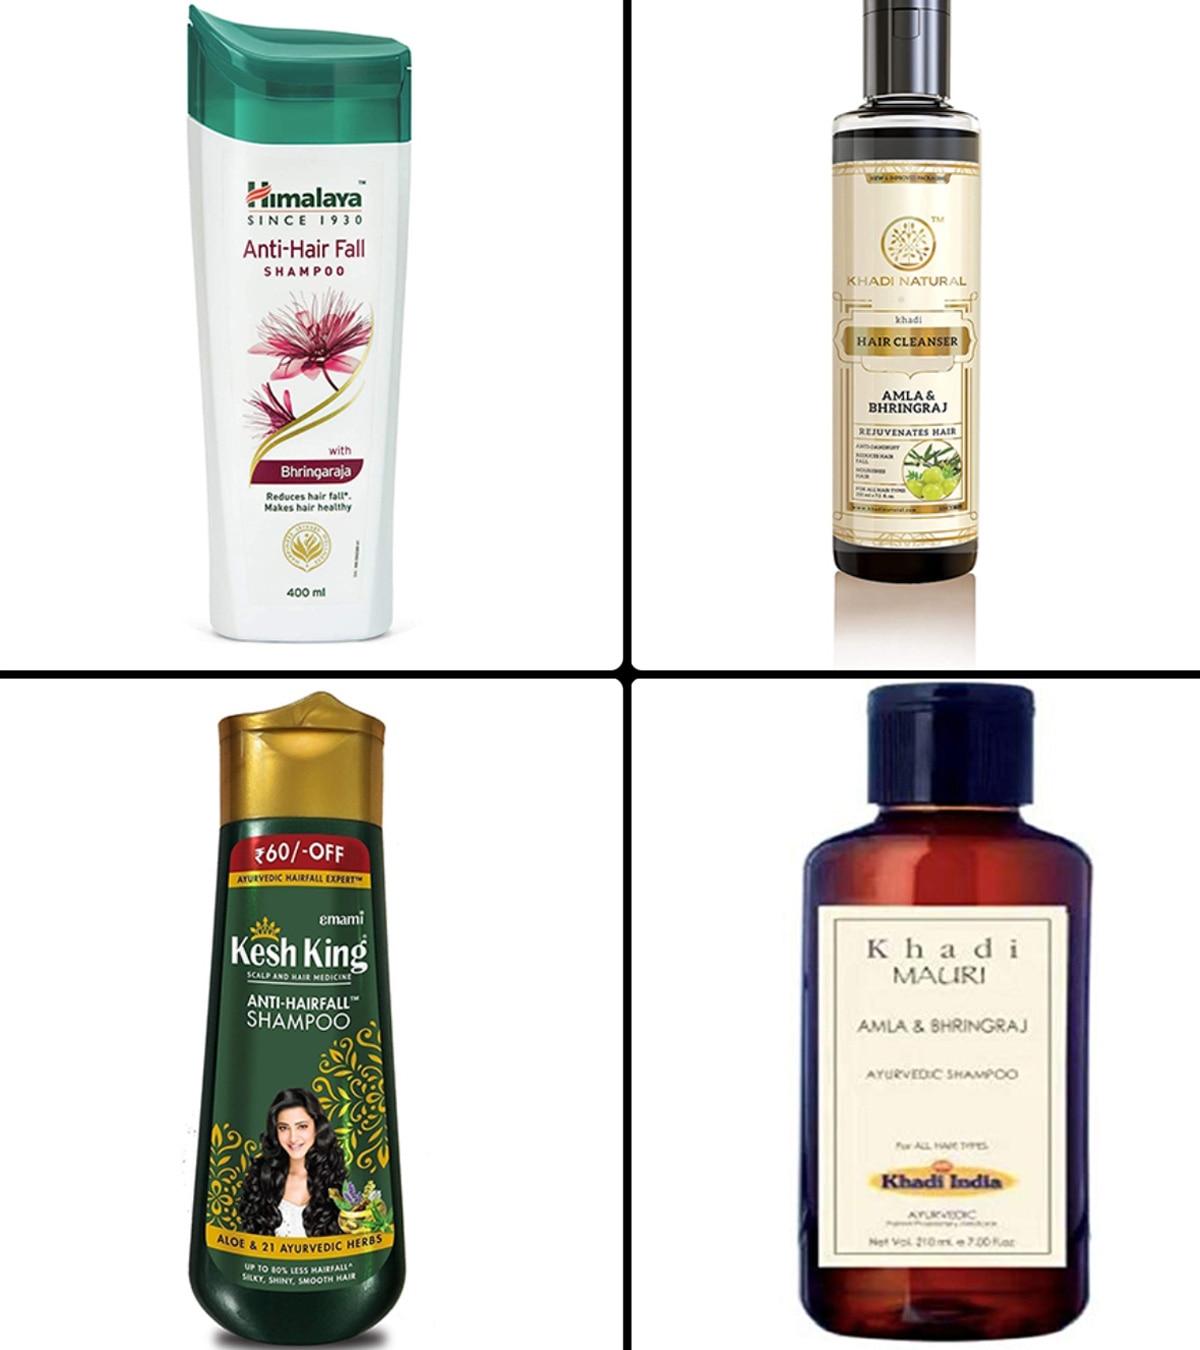 Which Is The Best Shampoo For Frizzy Hair? - Kama Ayurveda